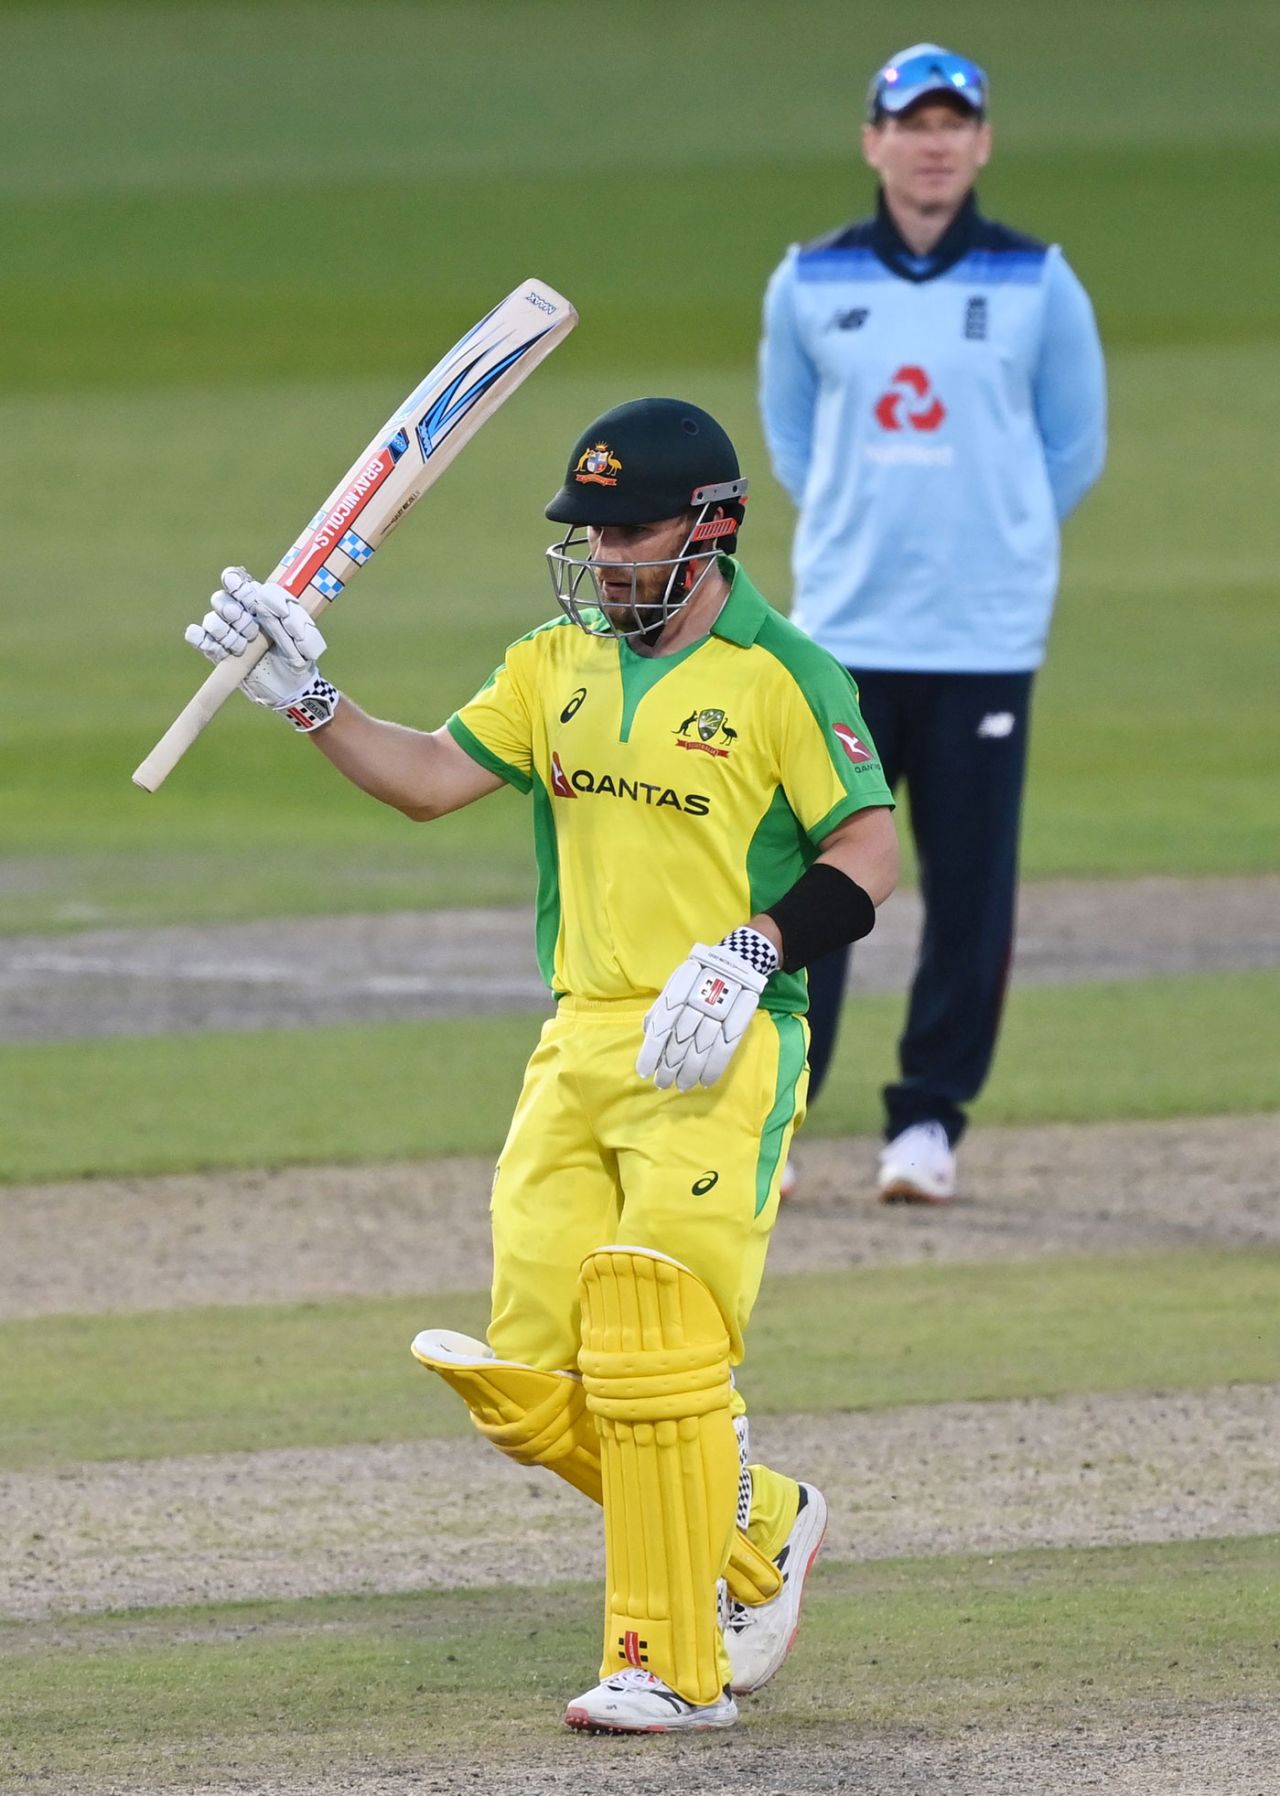 Aaron Finch brings up his half-century, 2nd ODI, England v Australia, at Emirates Old Trafford, September 13, 2020